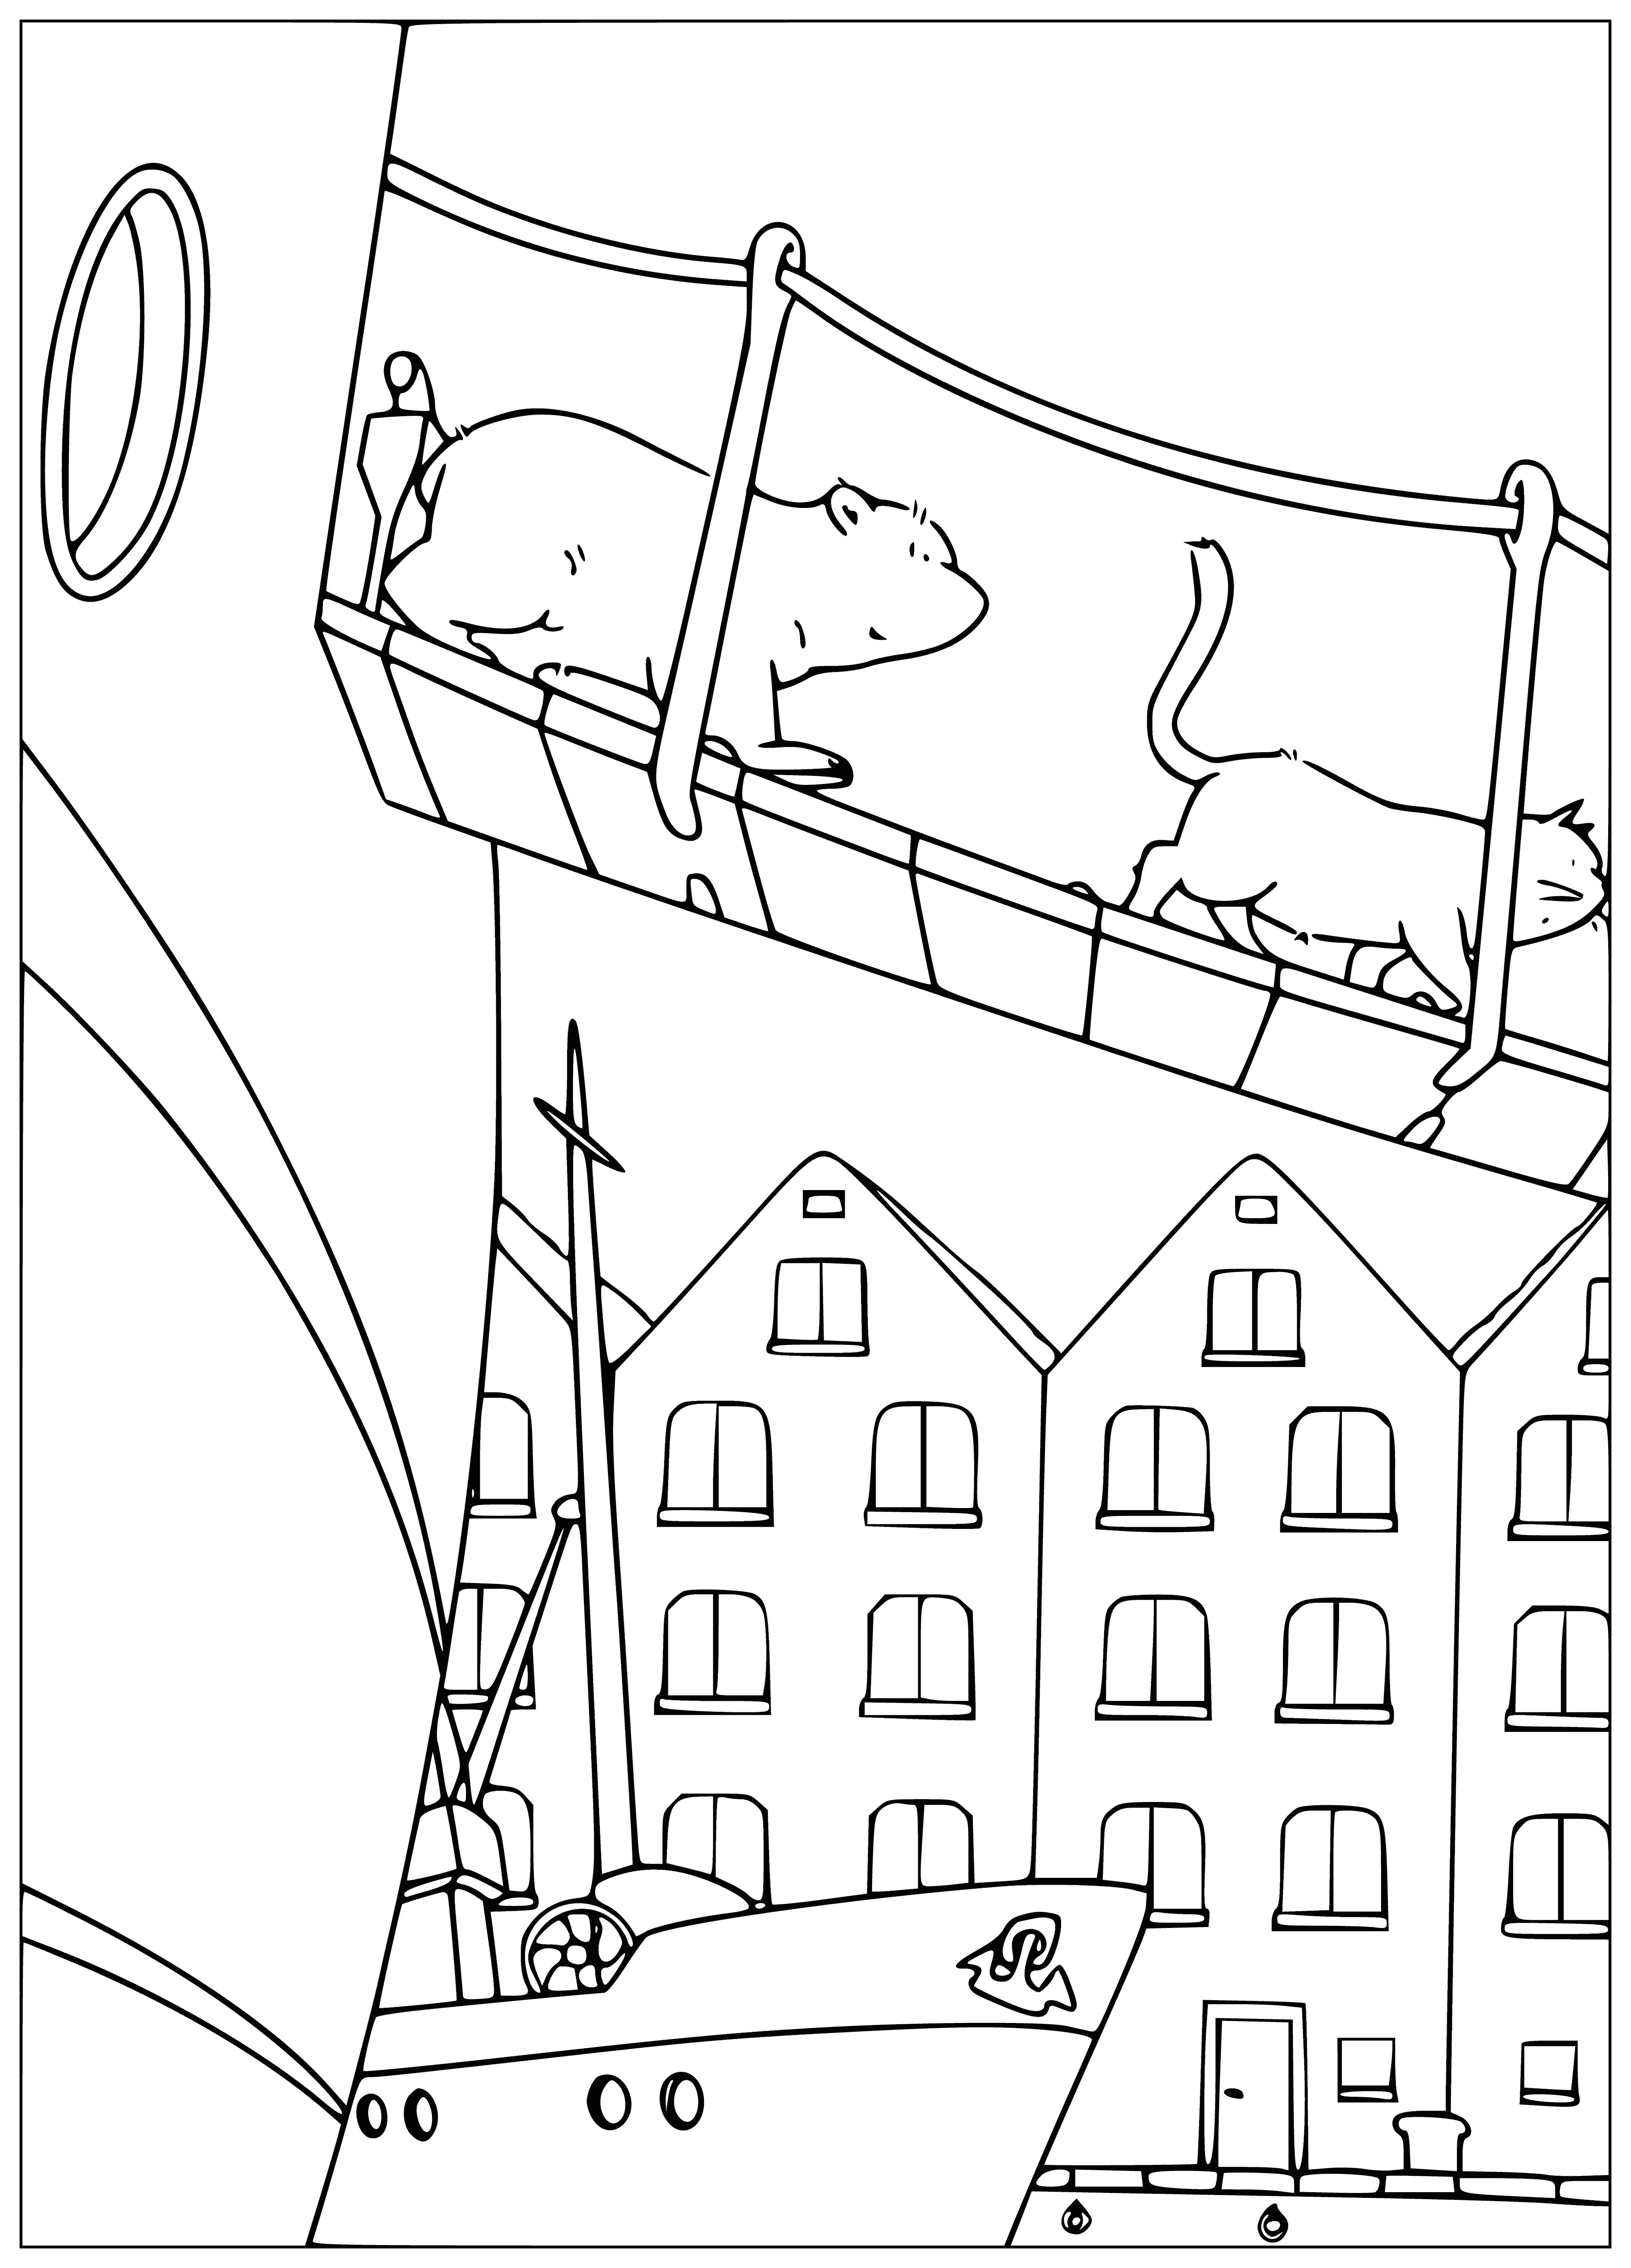 In the port coloring page